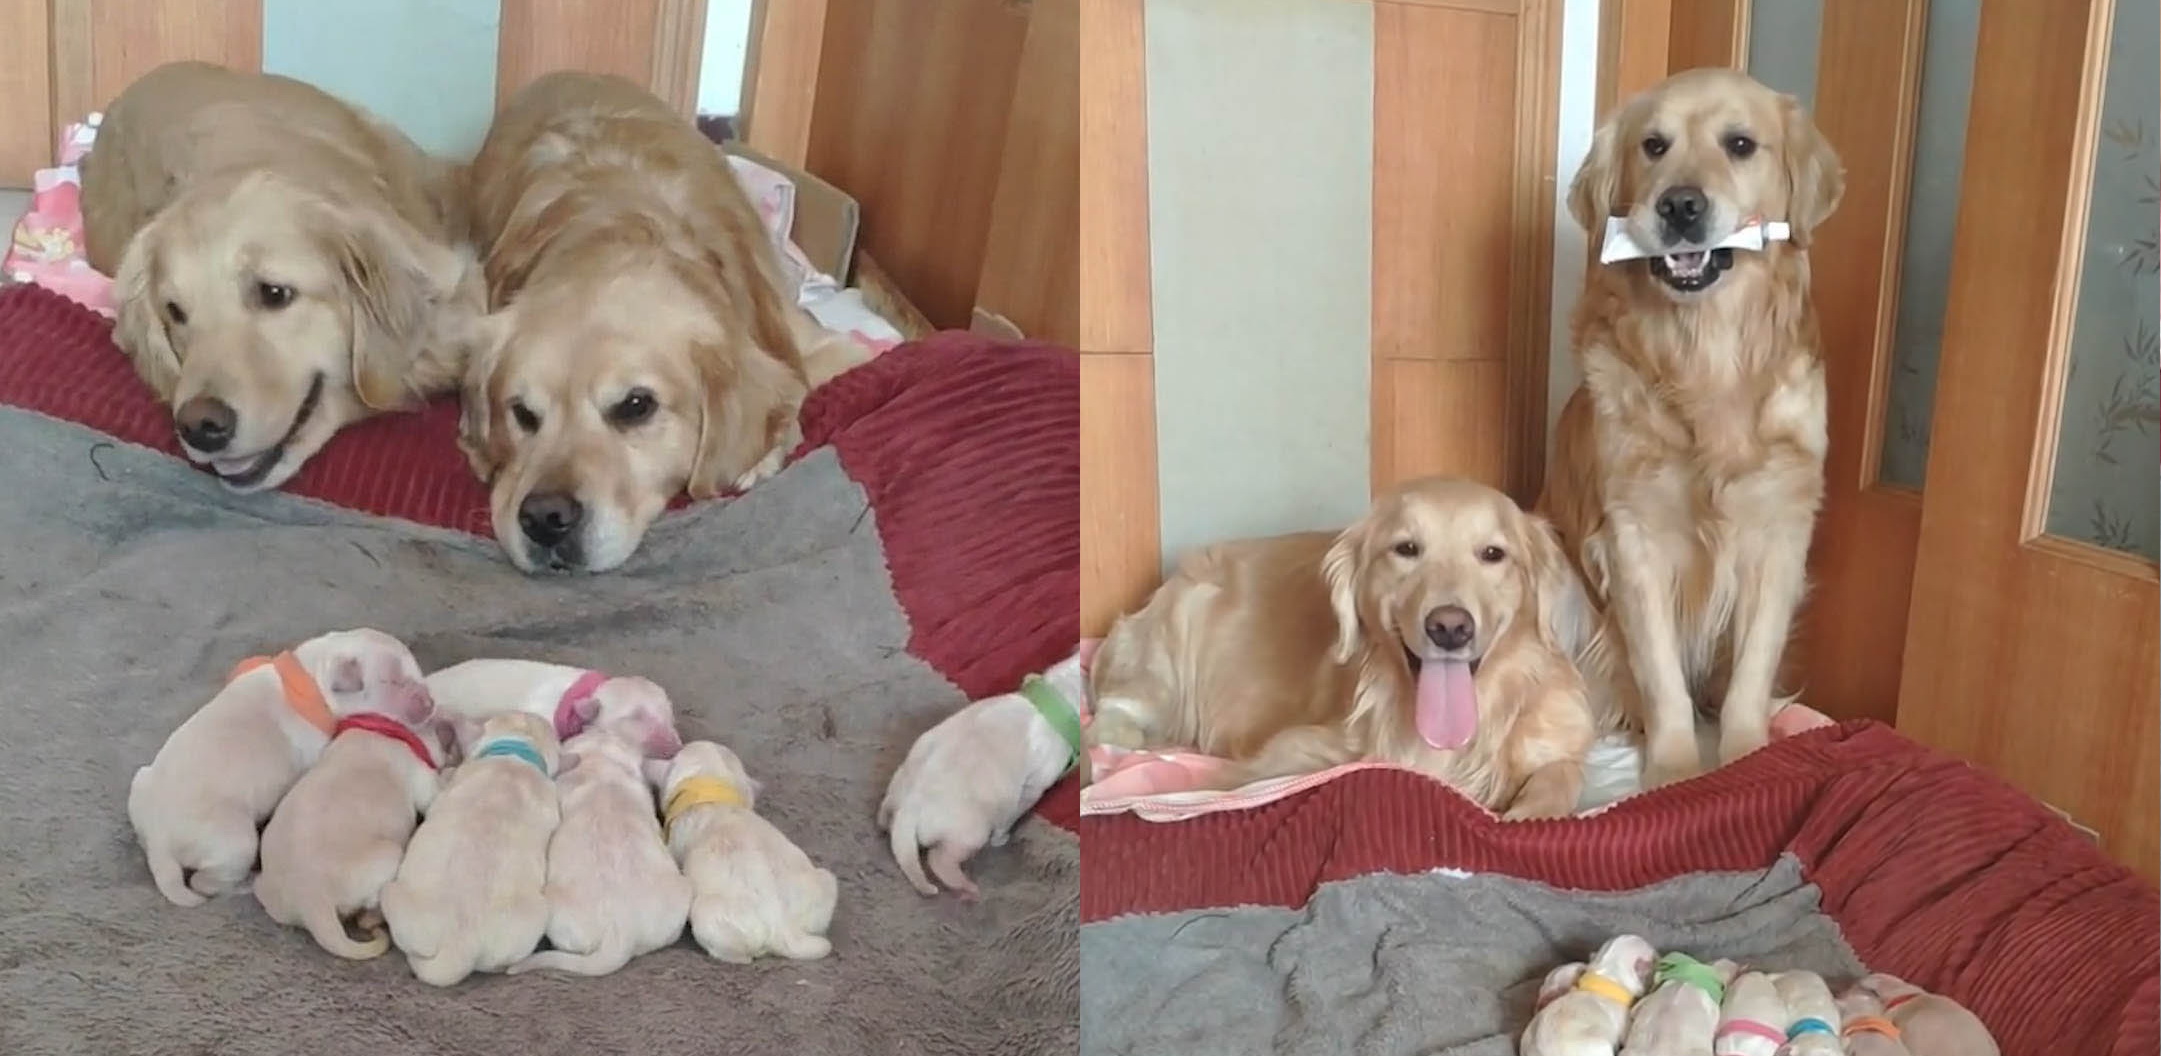 Golden Retrievers Become Parents For The First Time, And It’s Stunning How They Take Care of The Pups